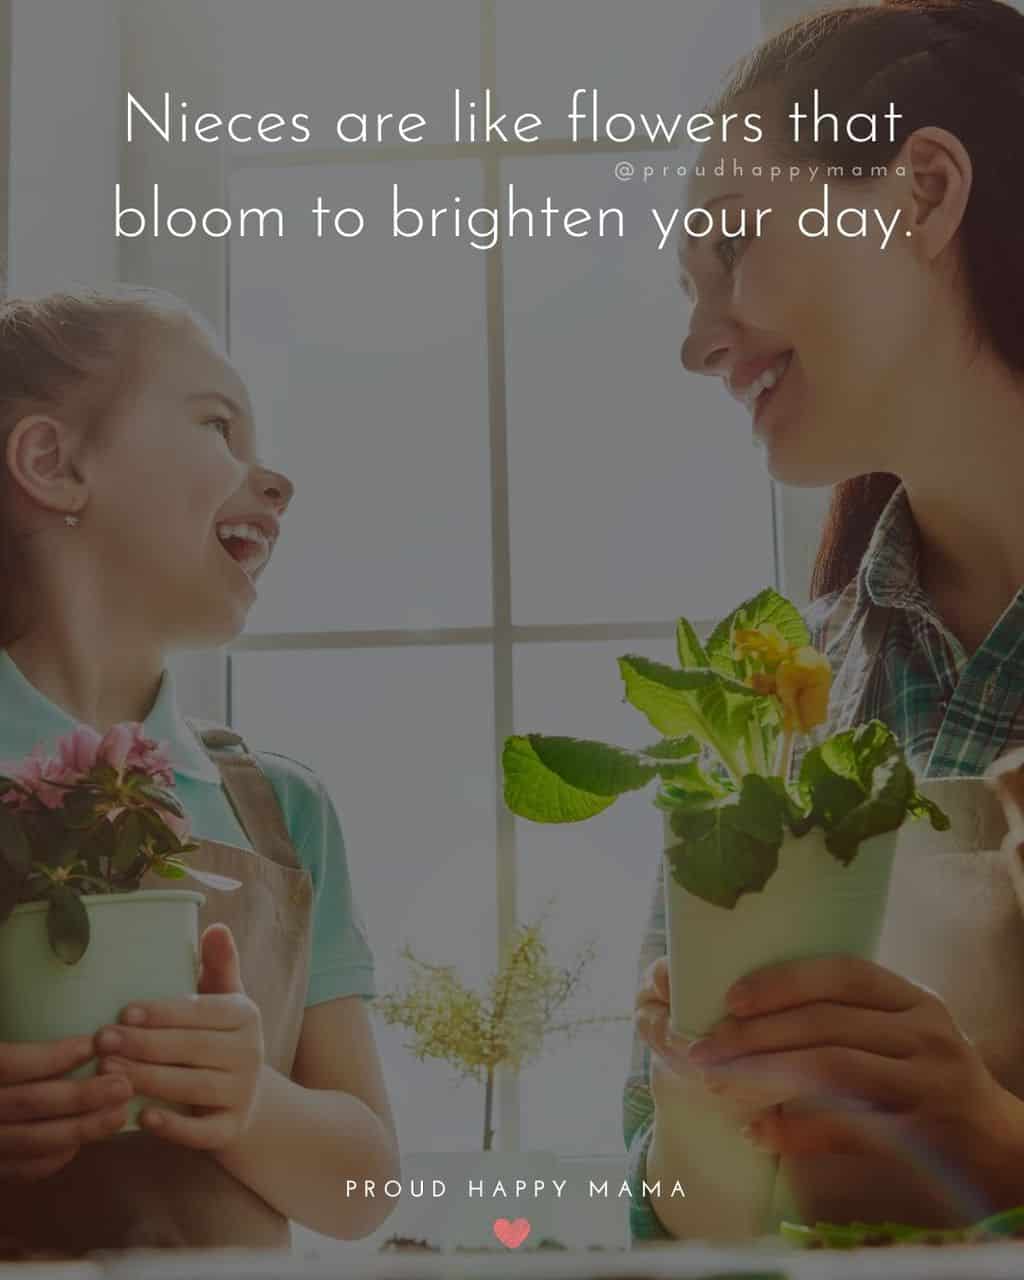 Niece Quotes - Nieces are like flowers that bloom to brighten your day.